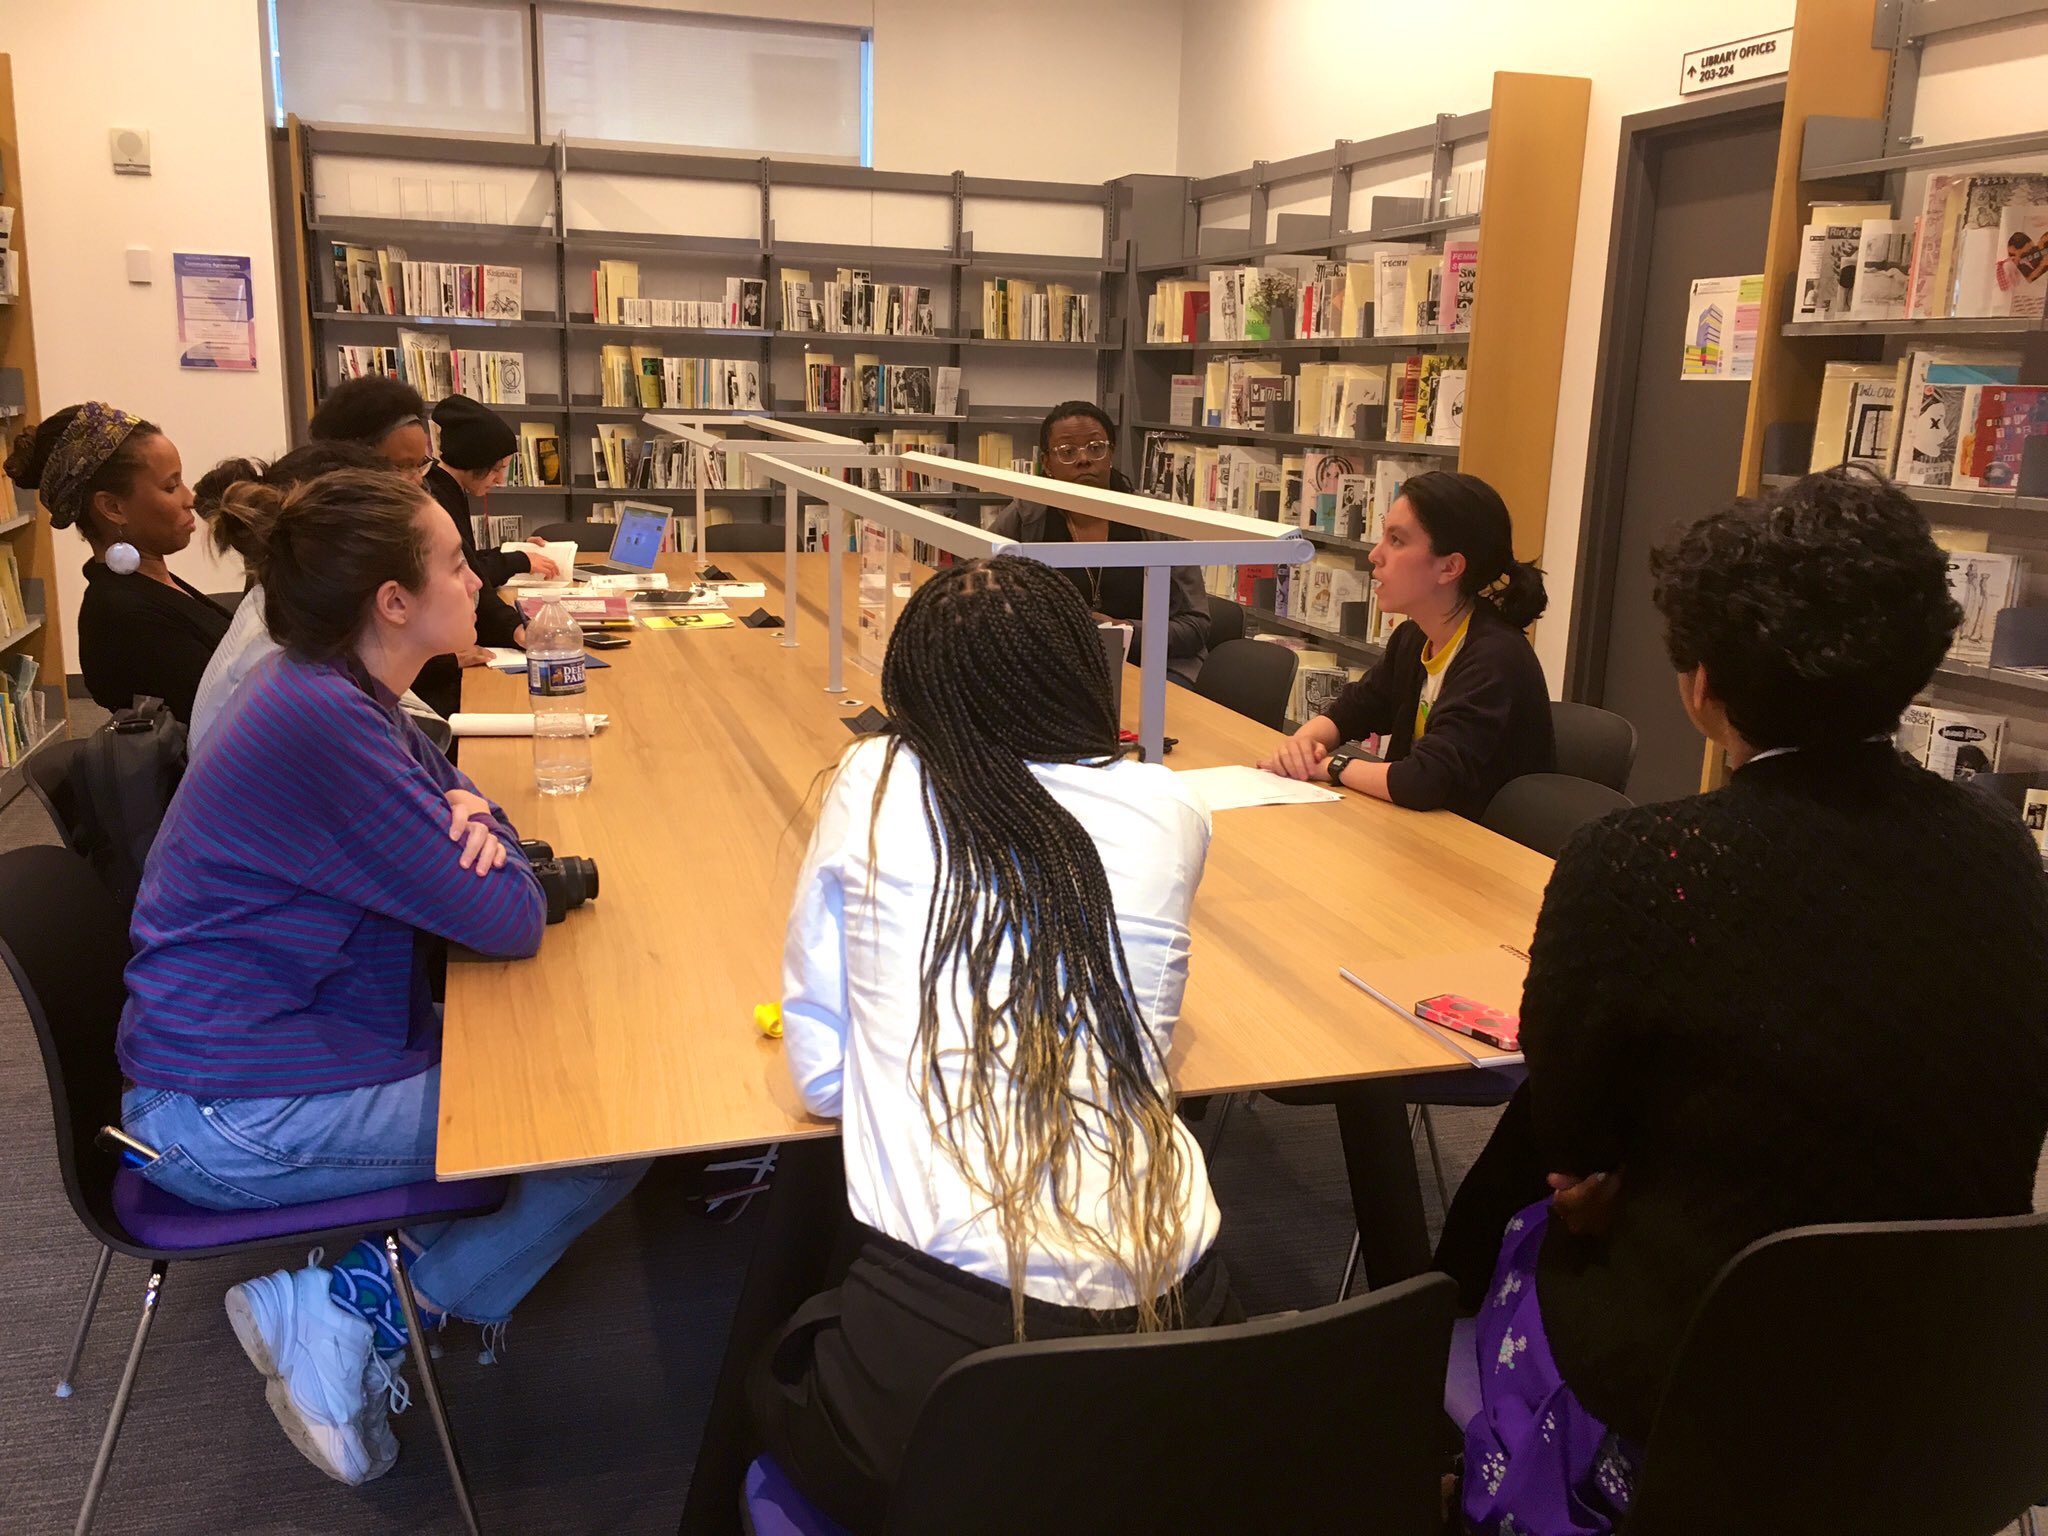 Summer Fellows sit around a long table in a room lined with bookshelves full of zines.